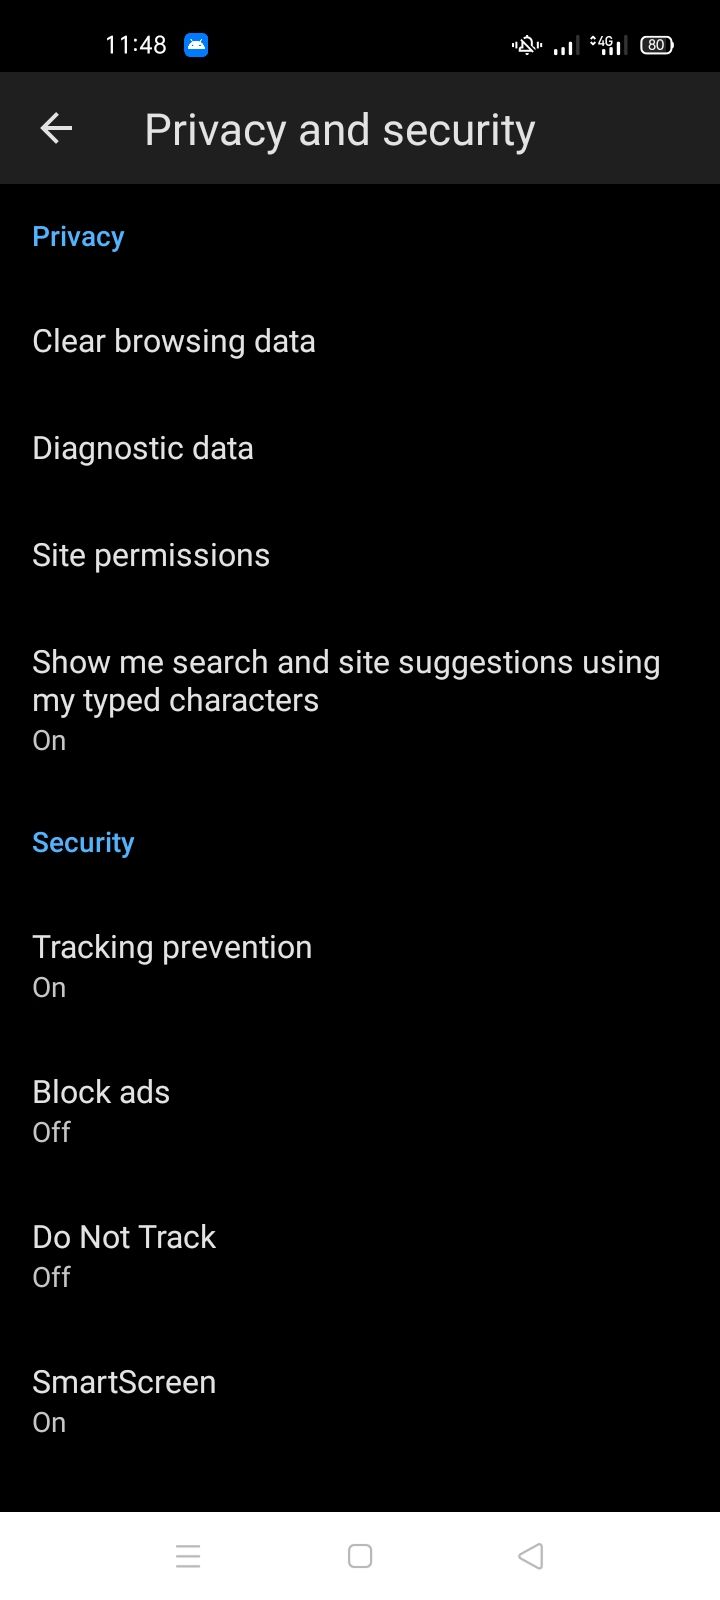 Locating Block-ads Option in Privacy and Security Window in Microsoft Edge for Android